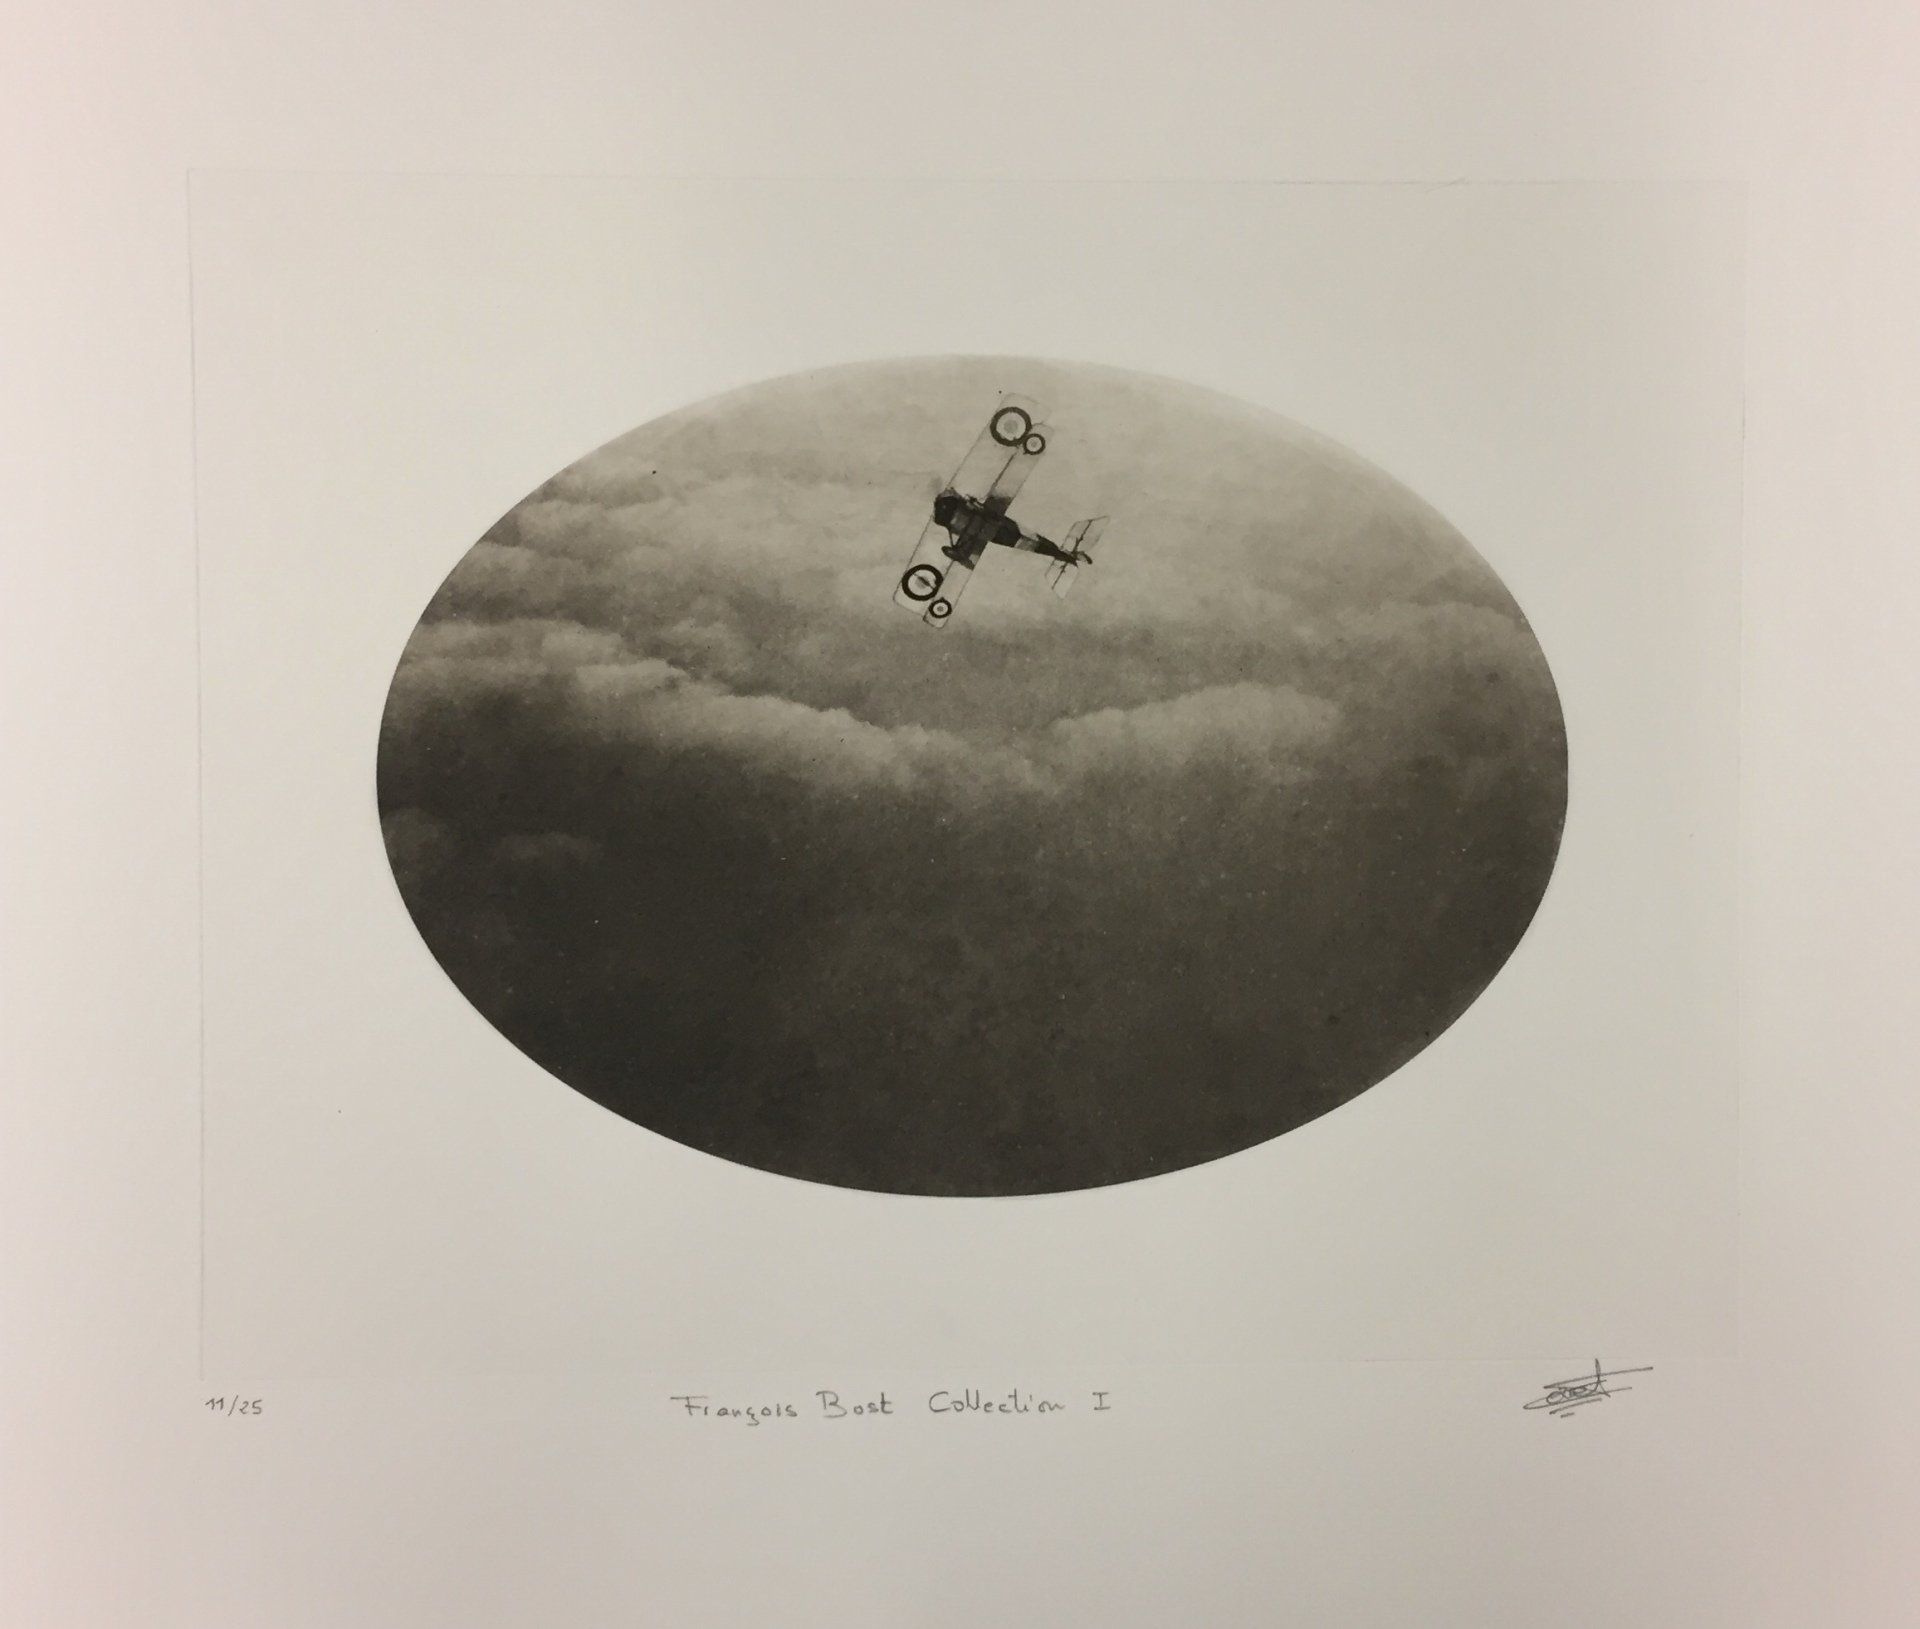 François Bost Collection 1, Nieuport Plane, Intaglio by Robert Russell, Olivier Cornet Gallery